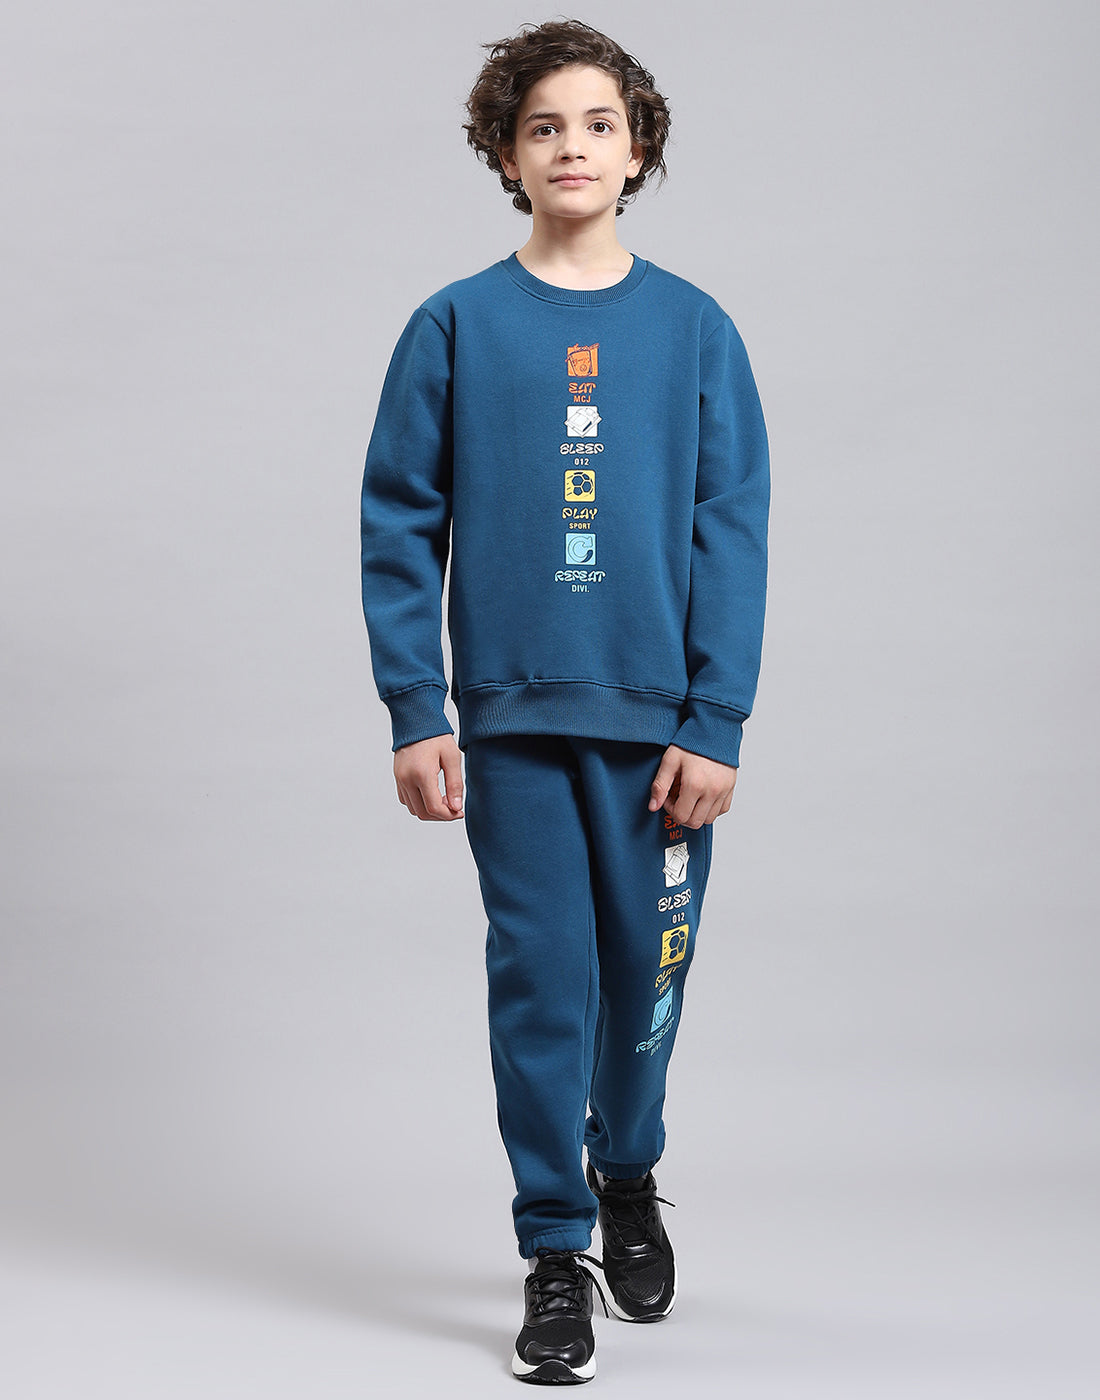 Boys Teal Blue Printed Round Neck Full Sleeve Tracksuits